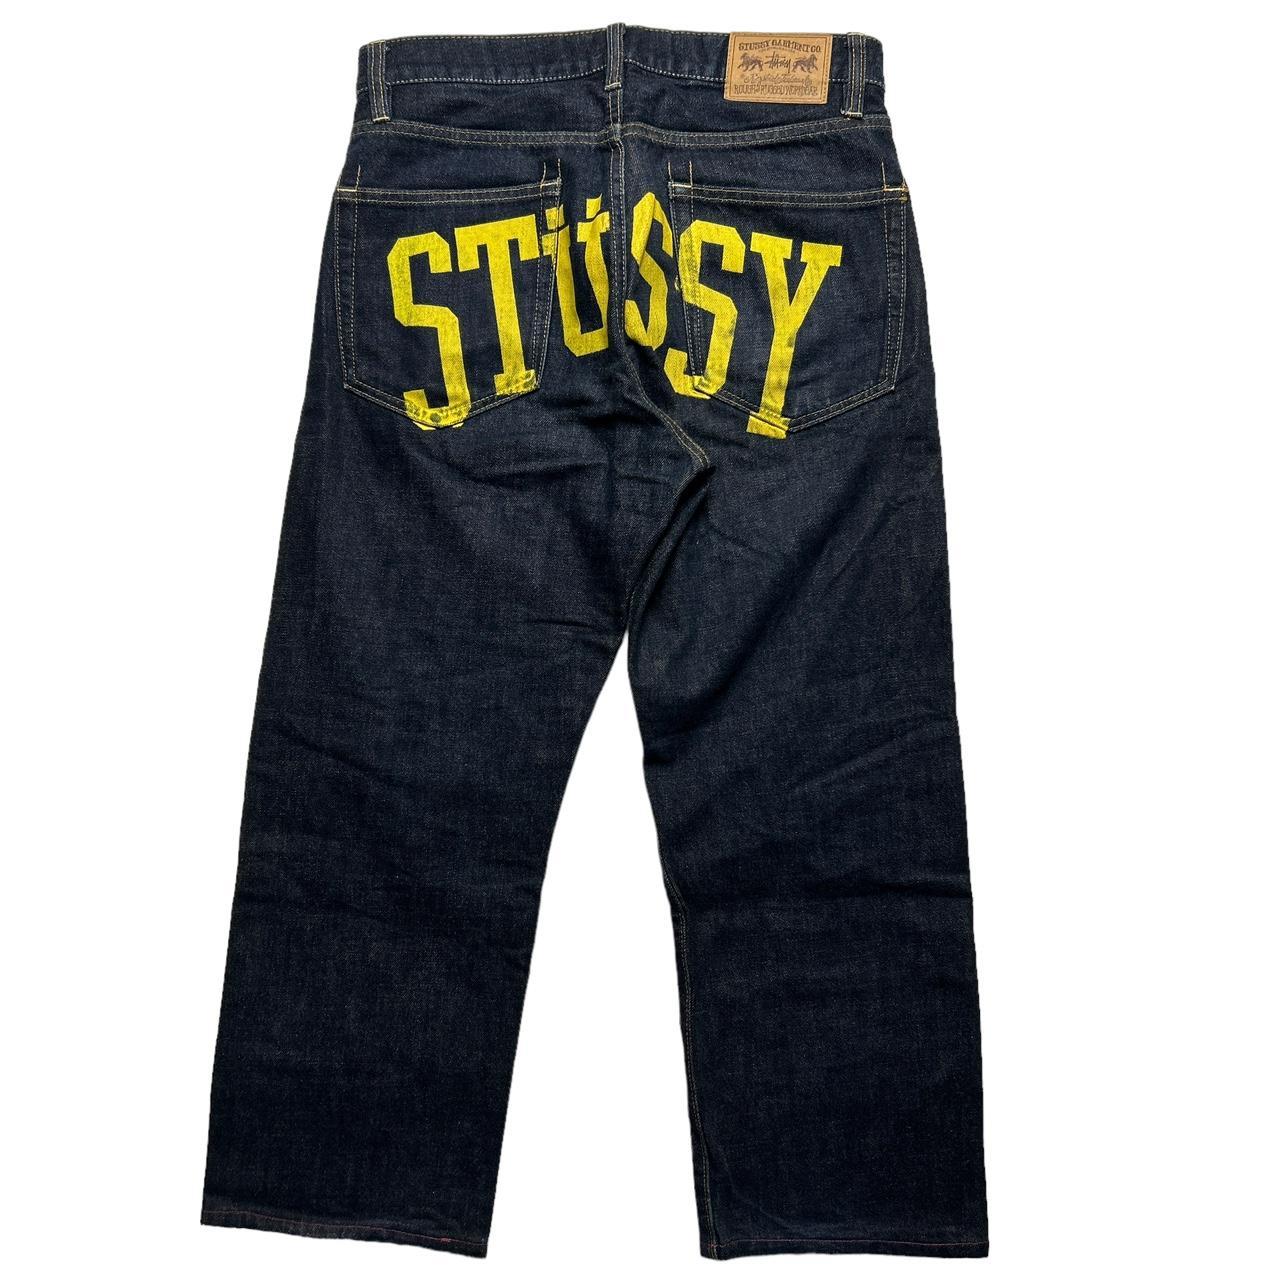 Stussy Spellout Jeans (30")